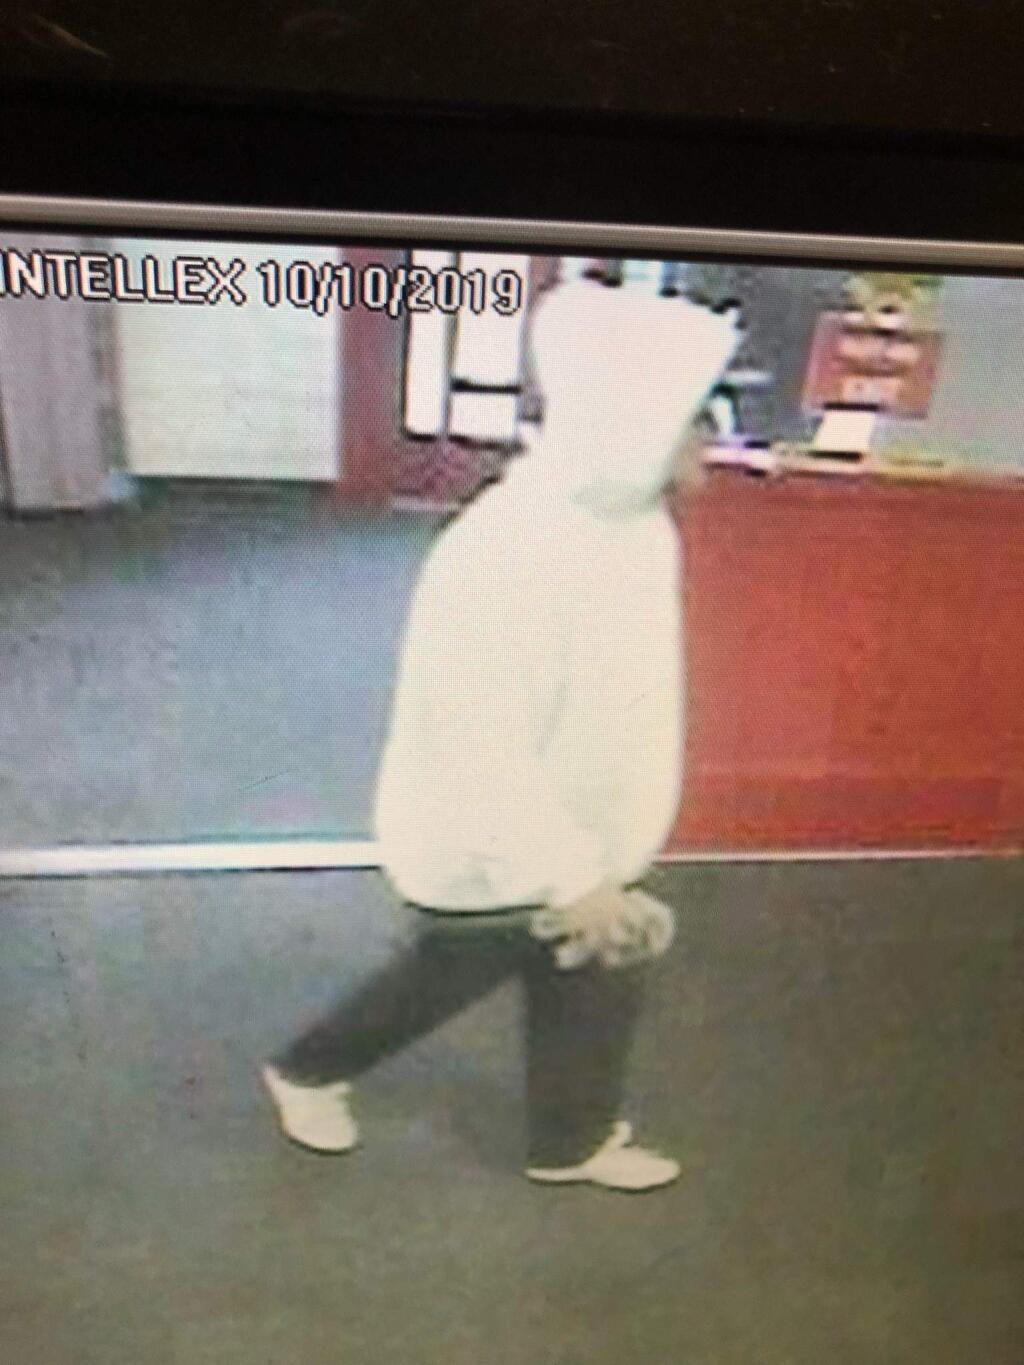 Police are seeking this suspect in connection with a robbery at a Petaluma Subway.